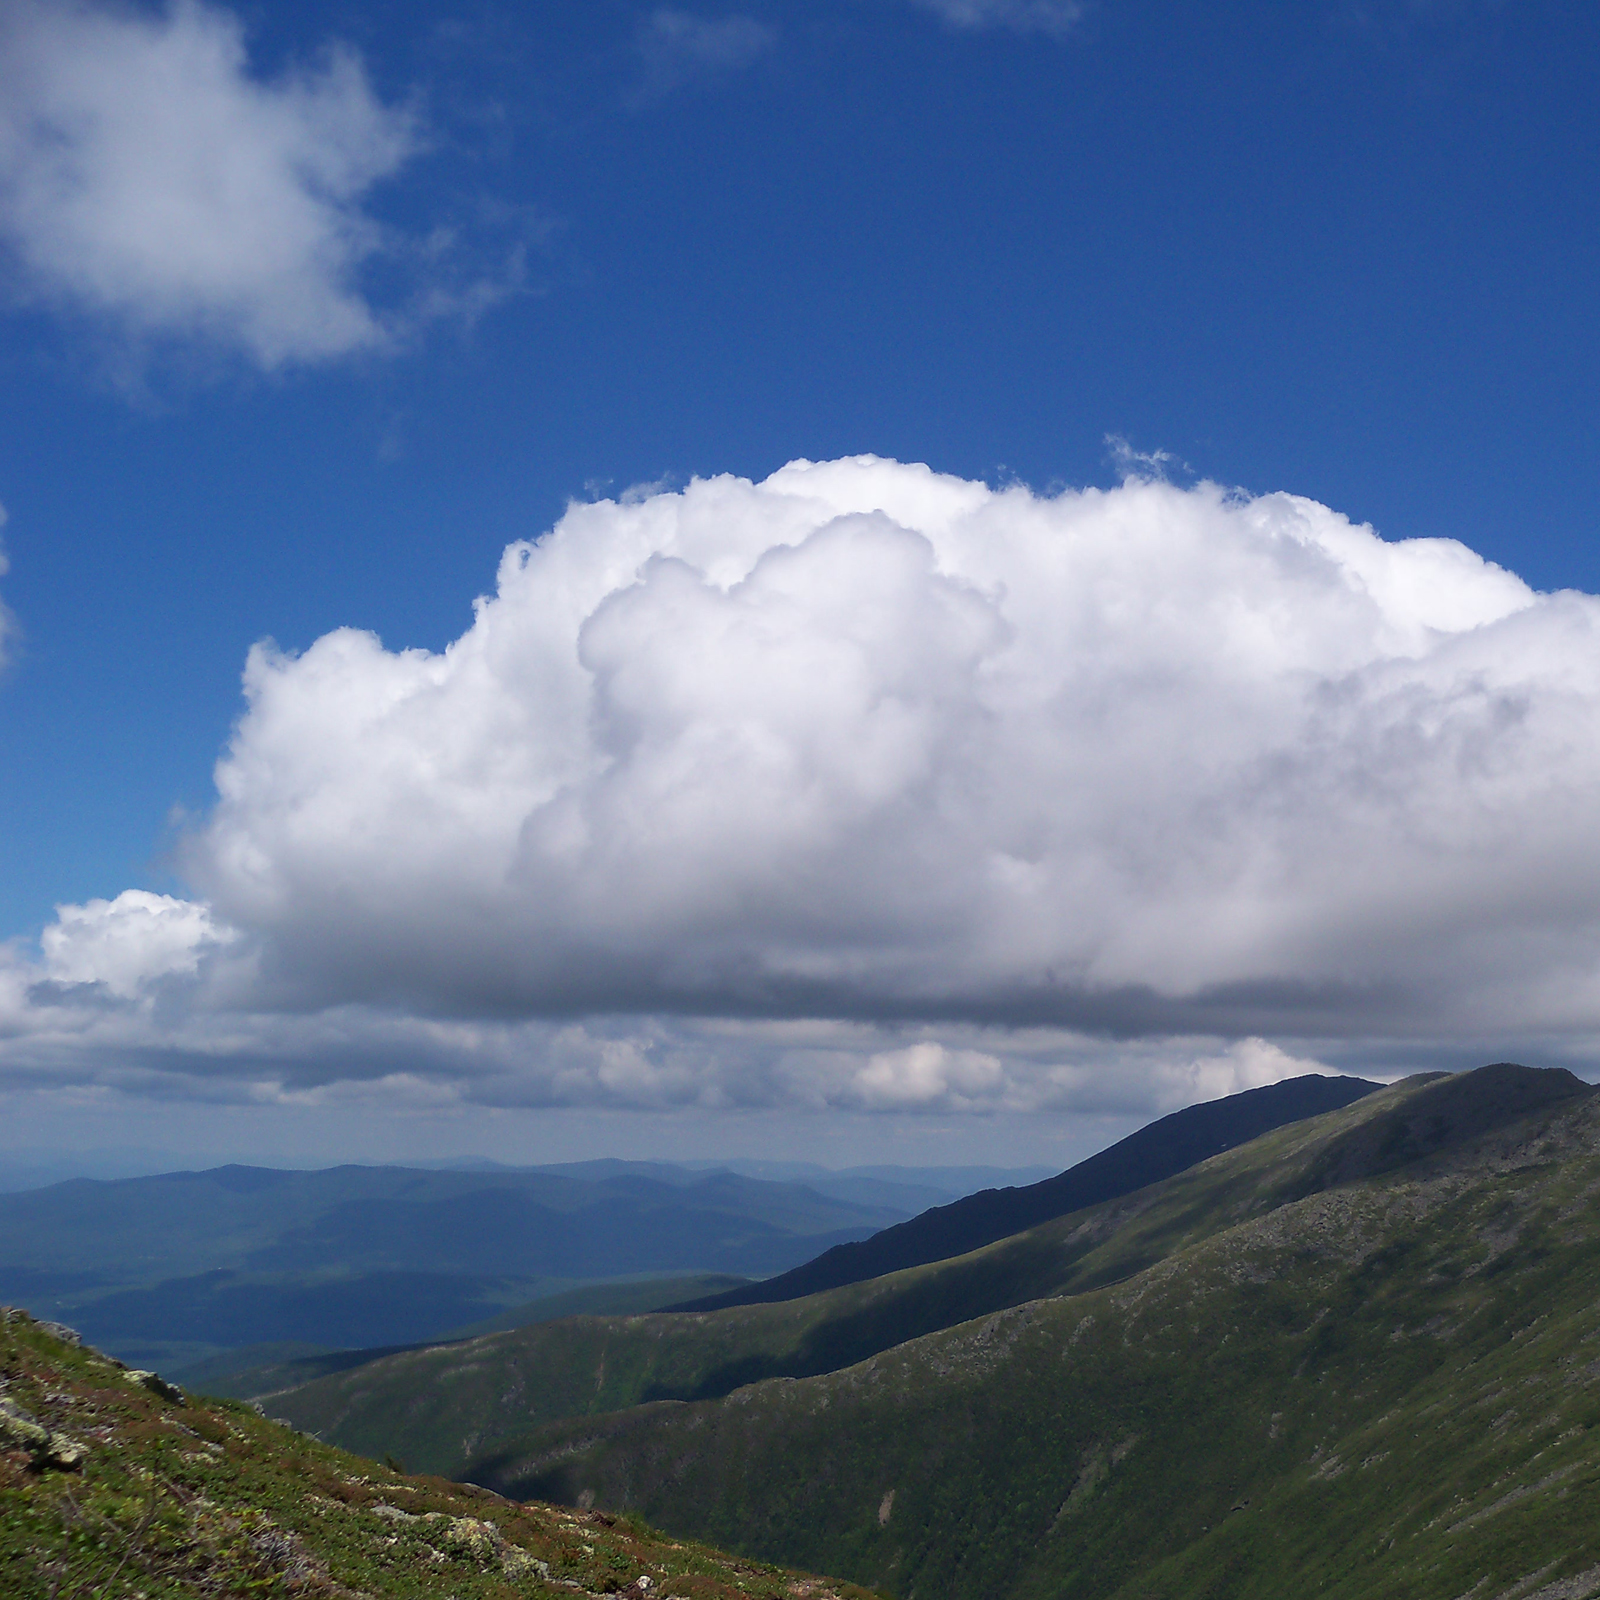 A view of the white mountains cloud